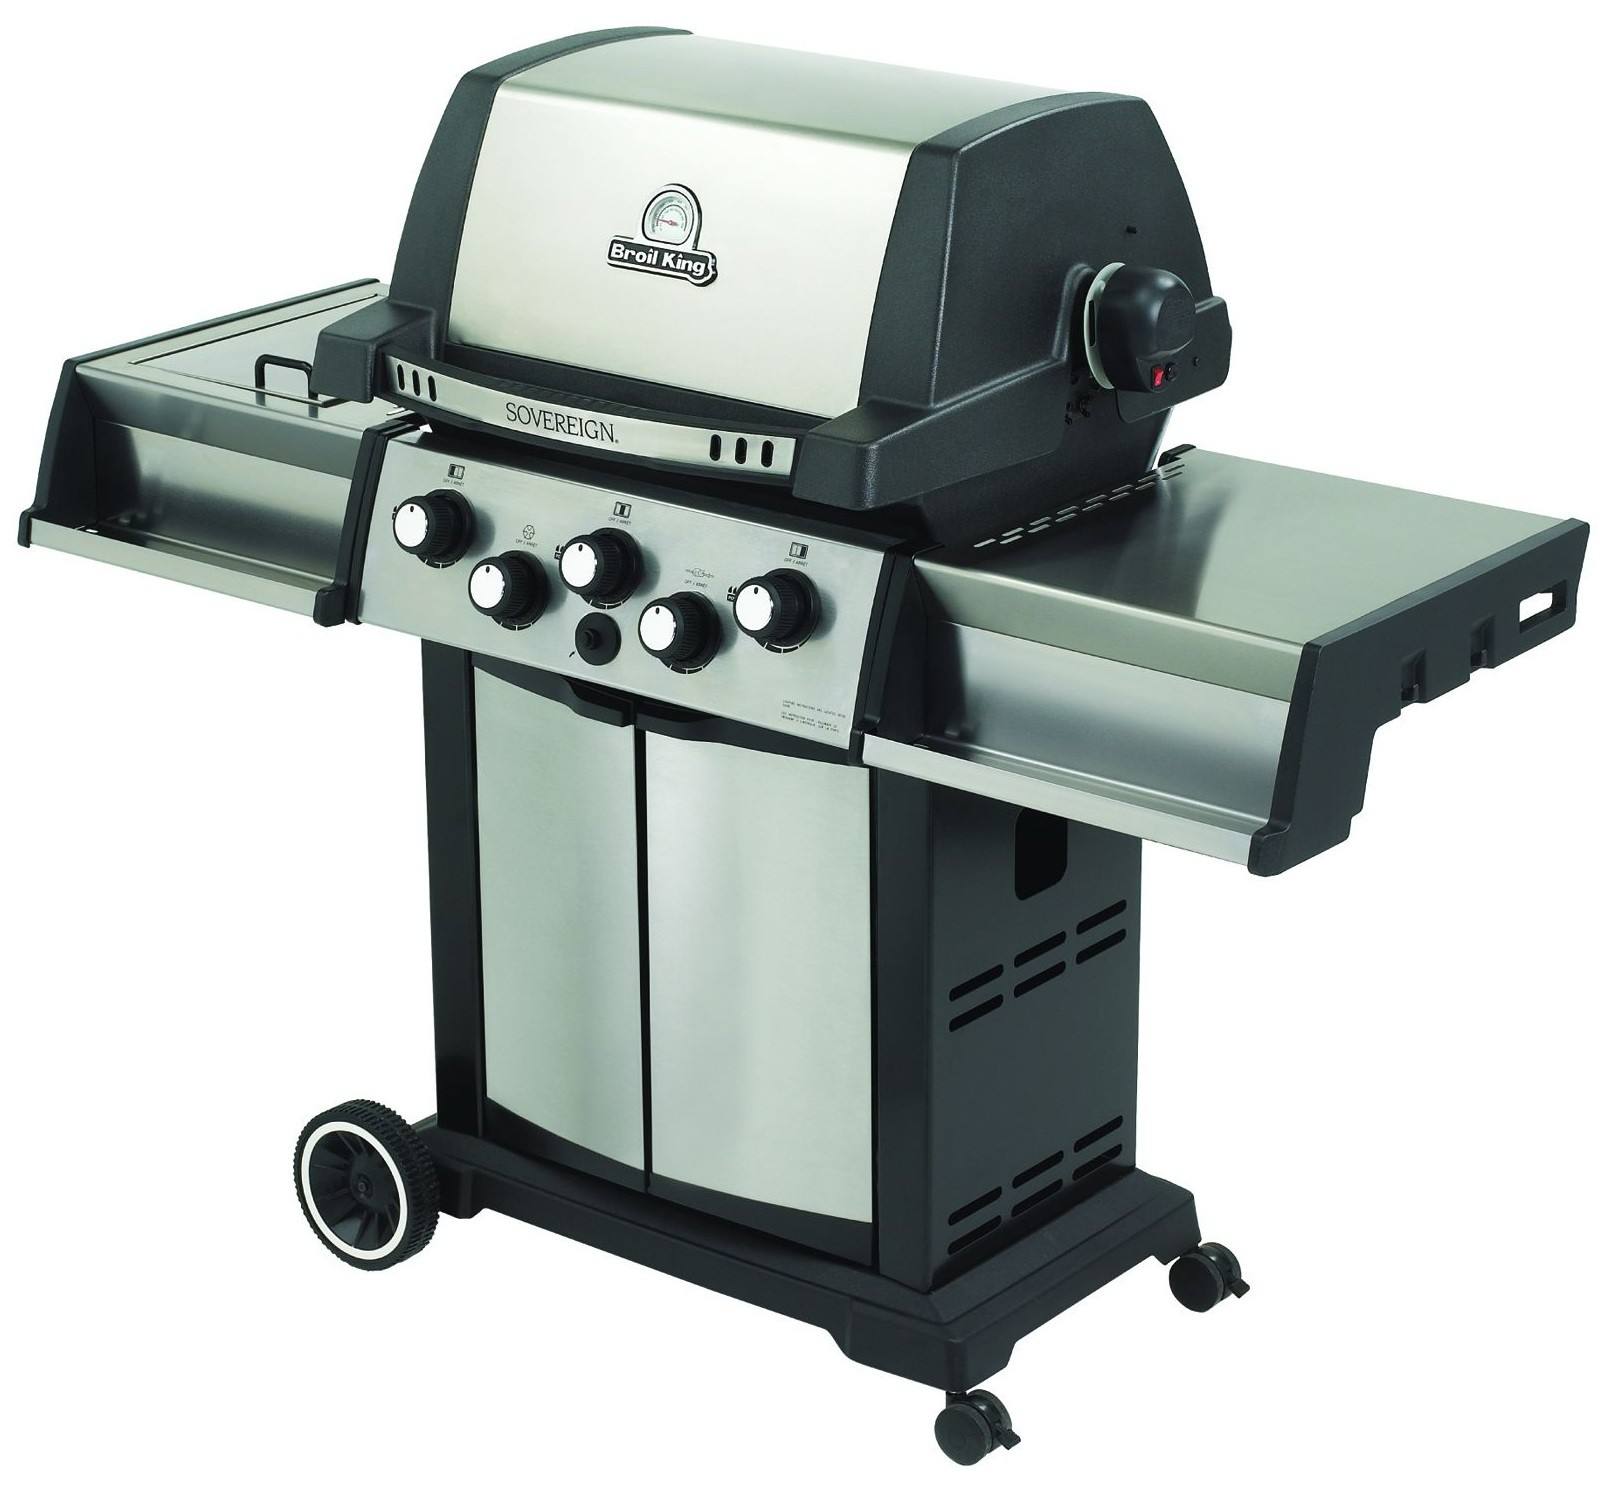 Outdoor Grill and Smoker Product Recalls